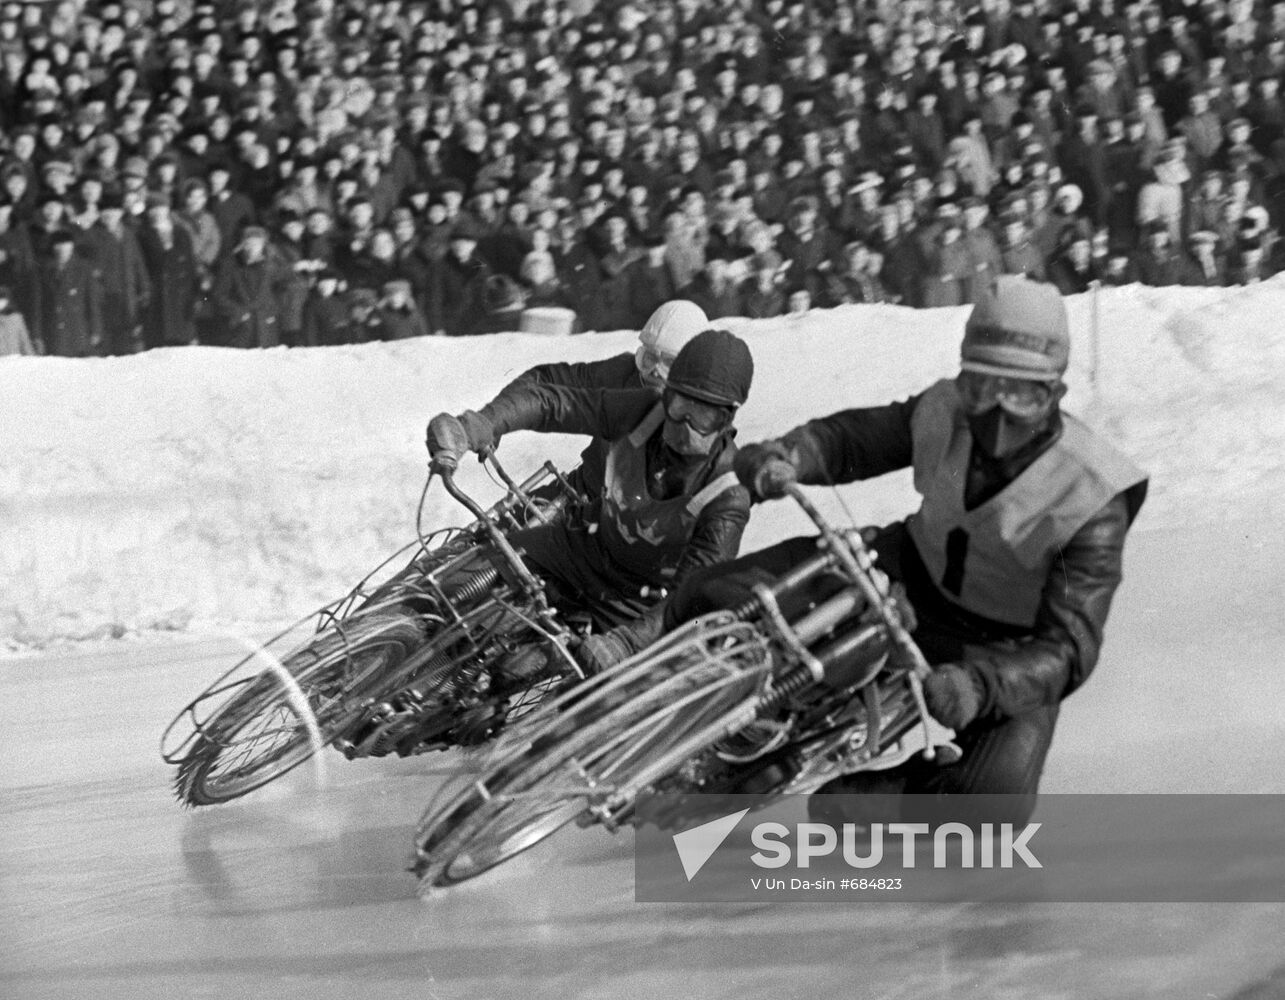 3rd round of Motorcycle Ice Racing World championship